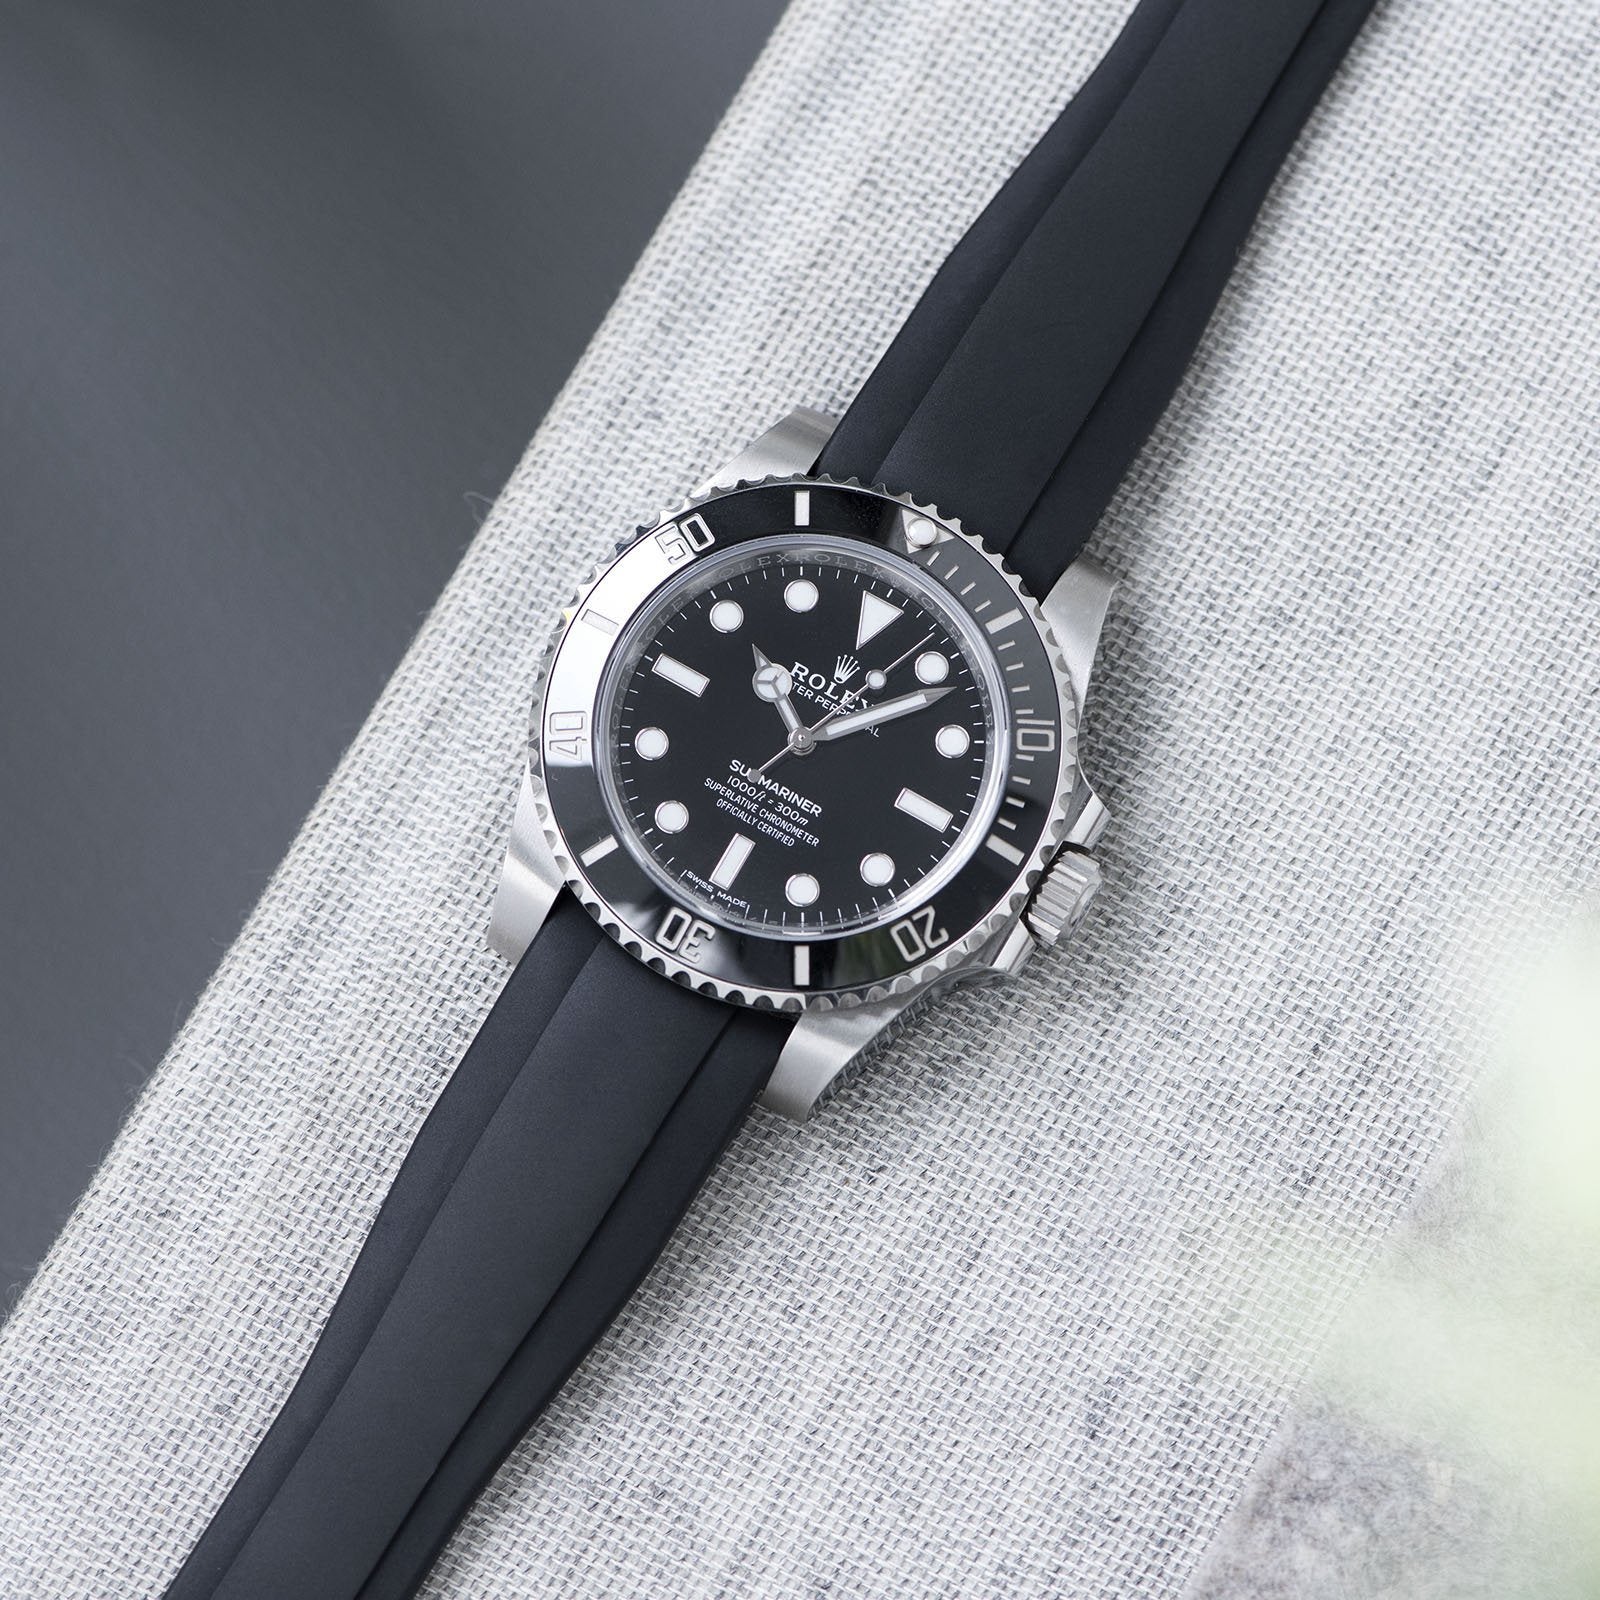 Everest Curved End Black Rubber Strap - ONLY For Modern Rolex With Deployant Clasp